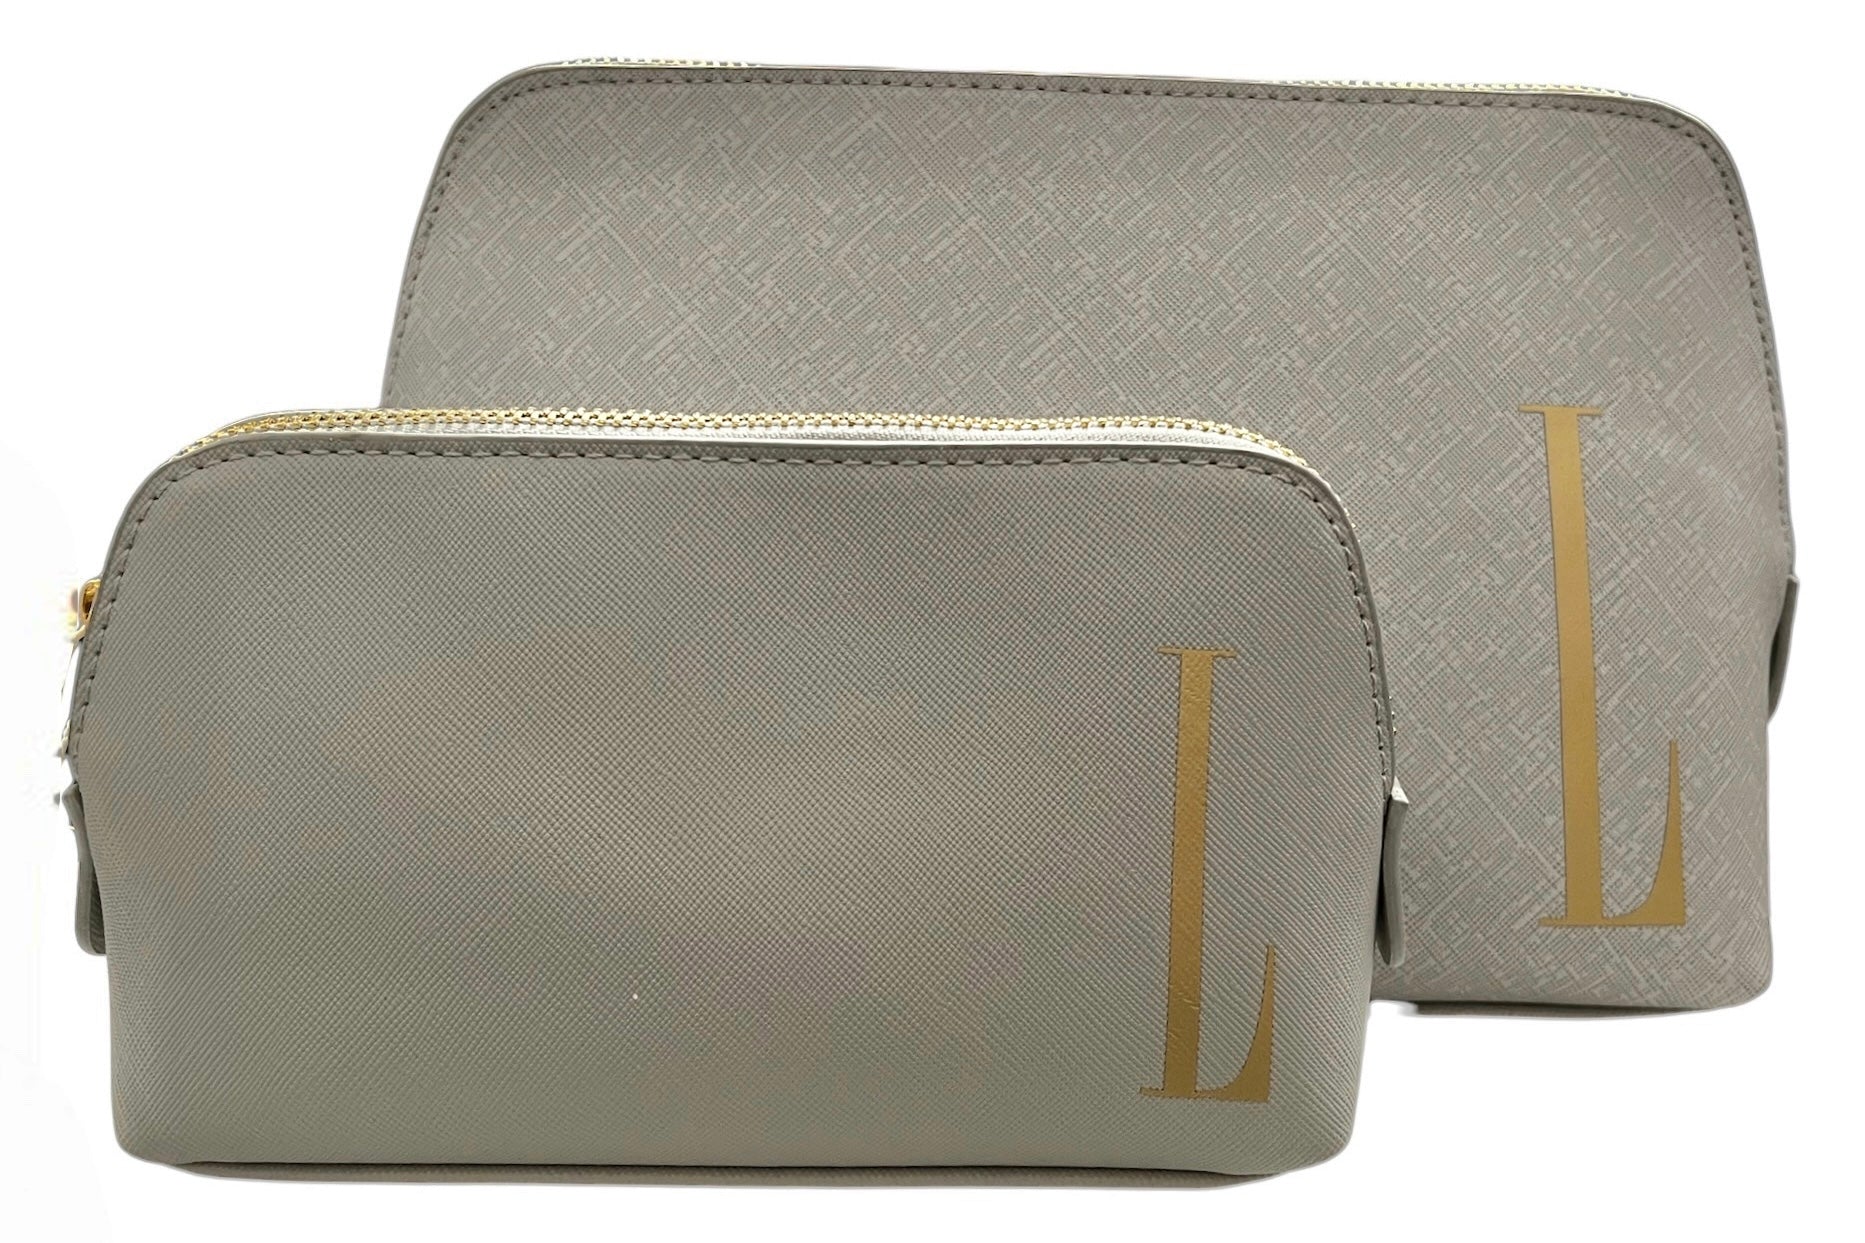 Initialed Large Cosmetic Bag - Grey